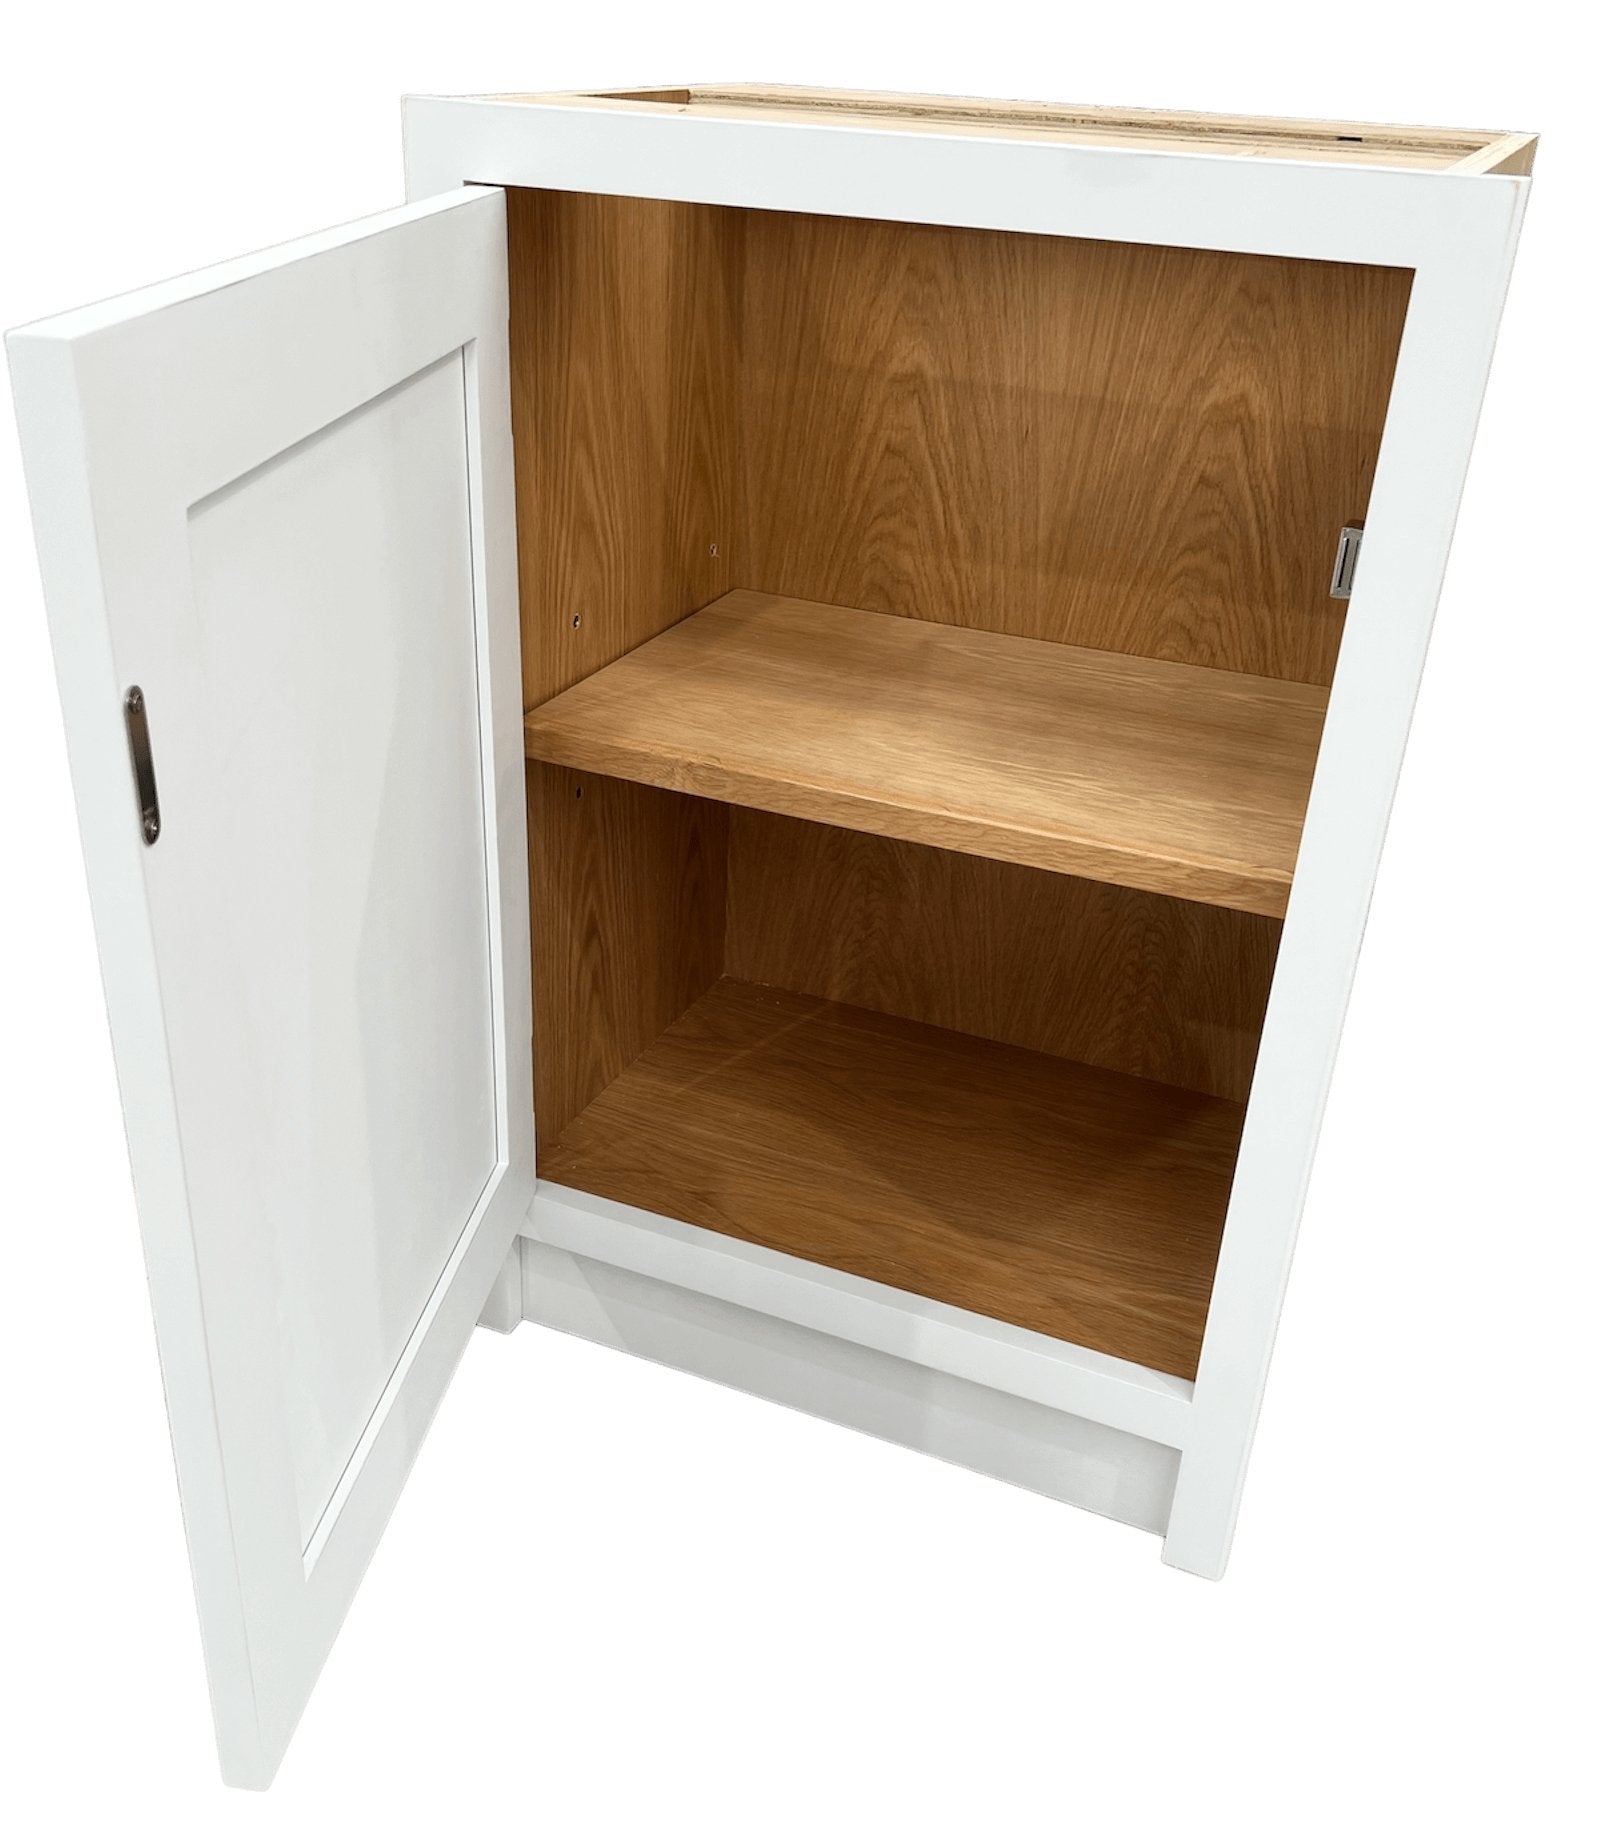 BH 600 - 600mm Highline single door base unit - Classic Kitchens Direct